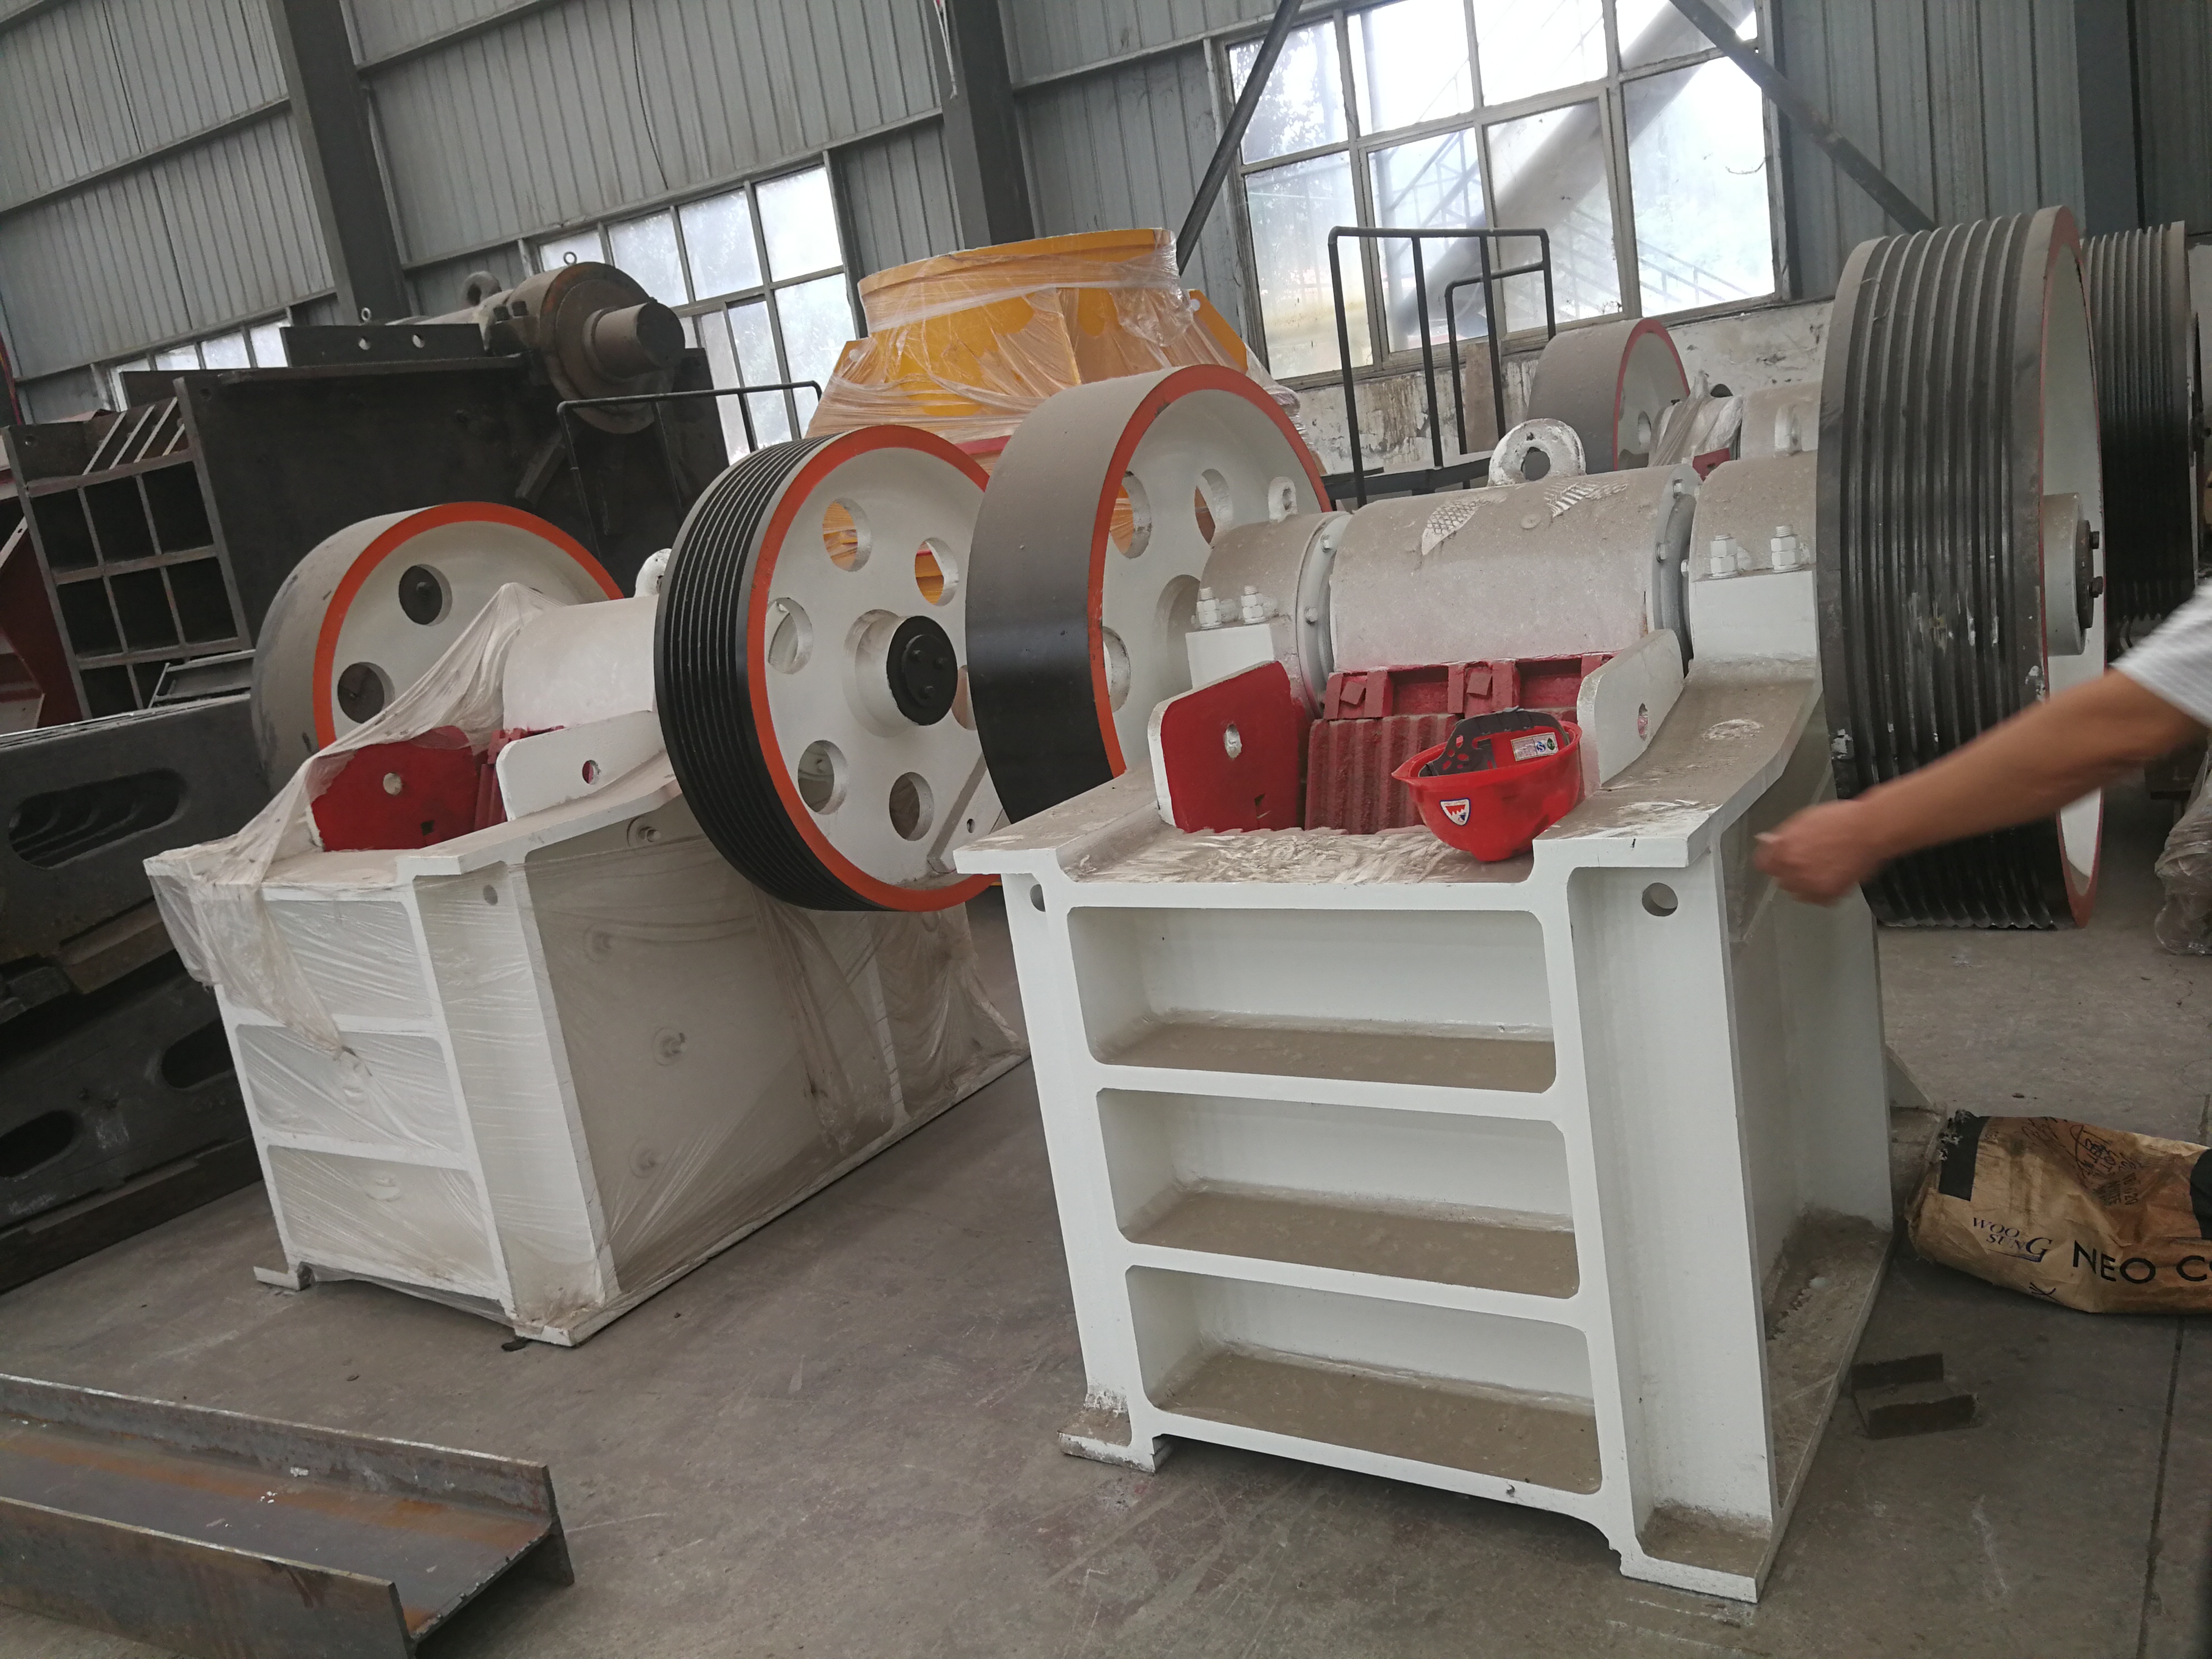 What kind of crusher is good for crushing iron ore? Jaw crusher, cone crusher or double roller crusher?